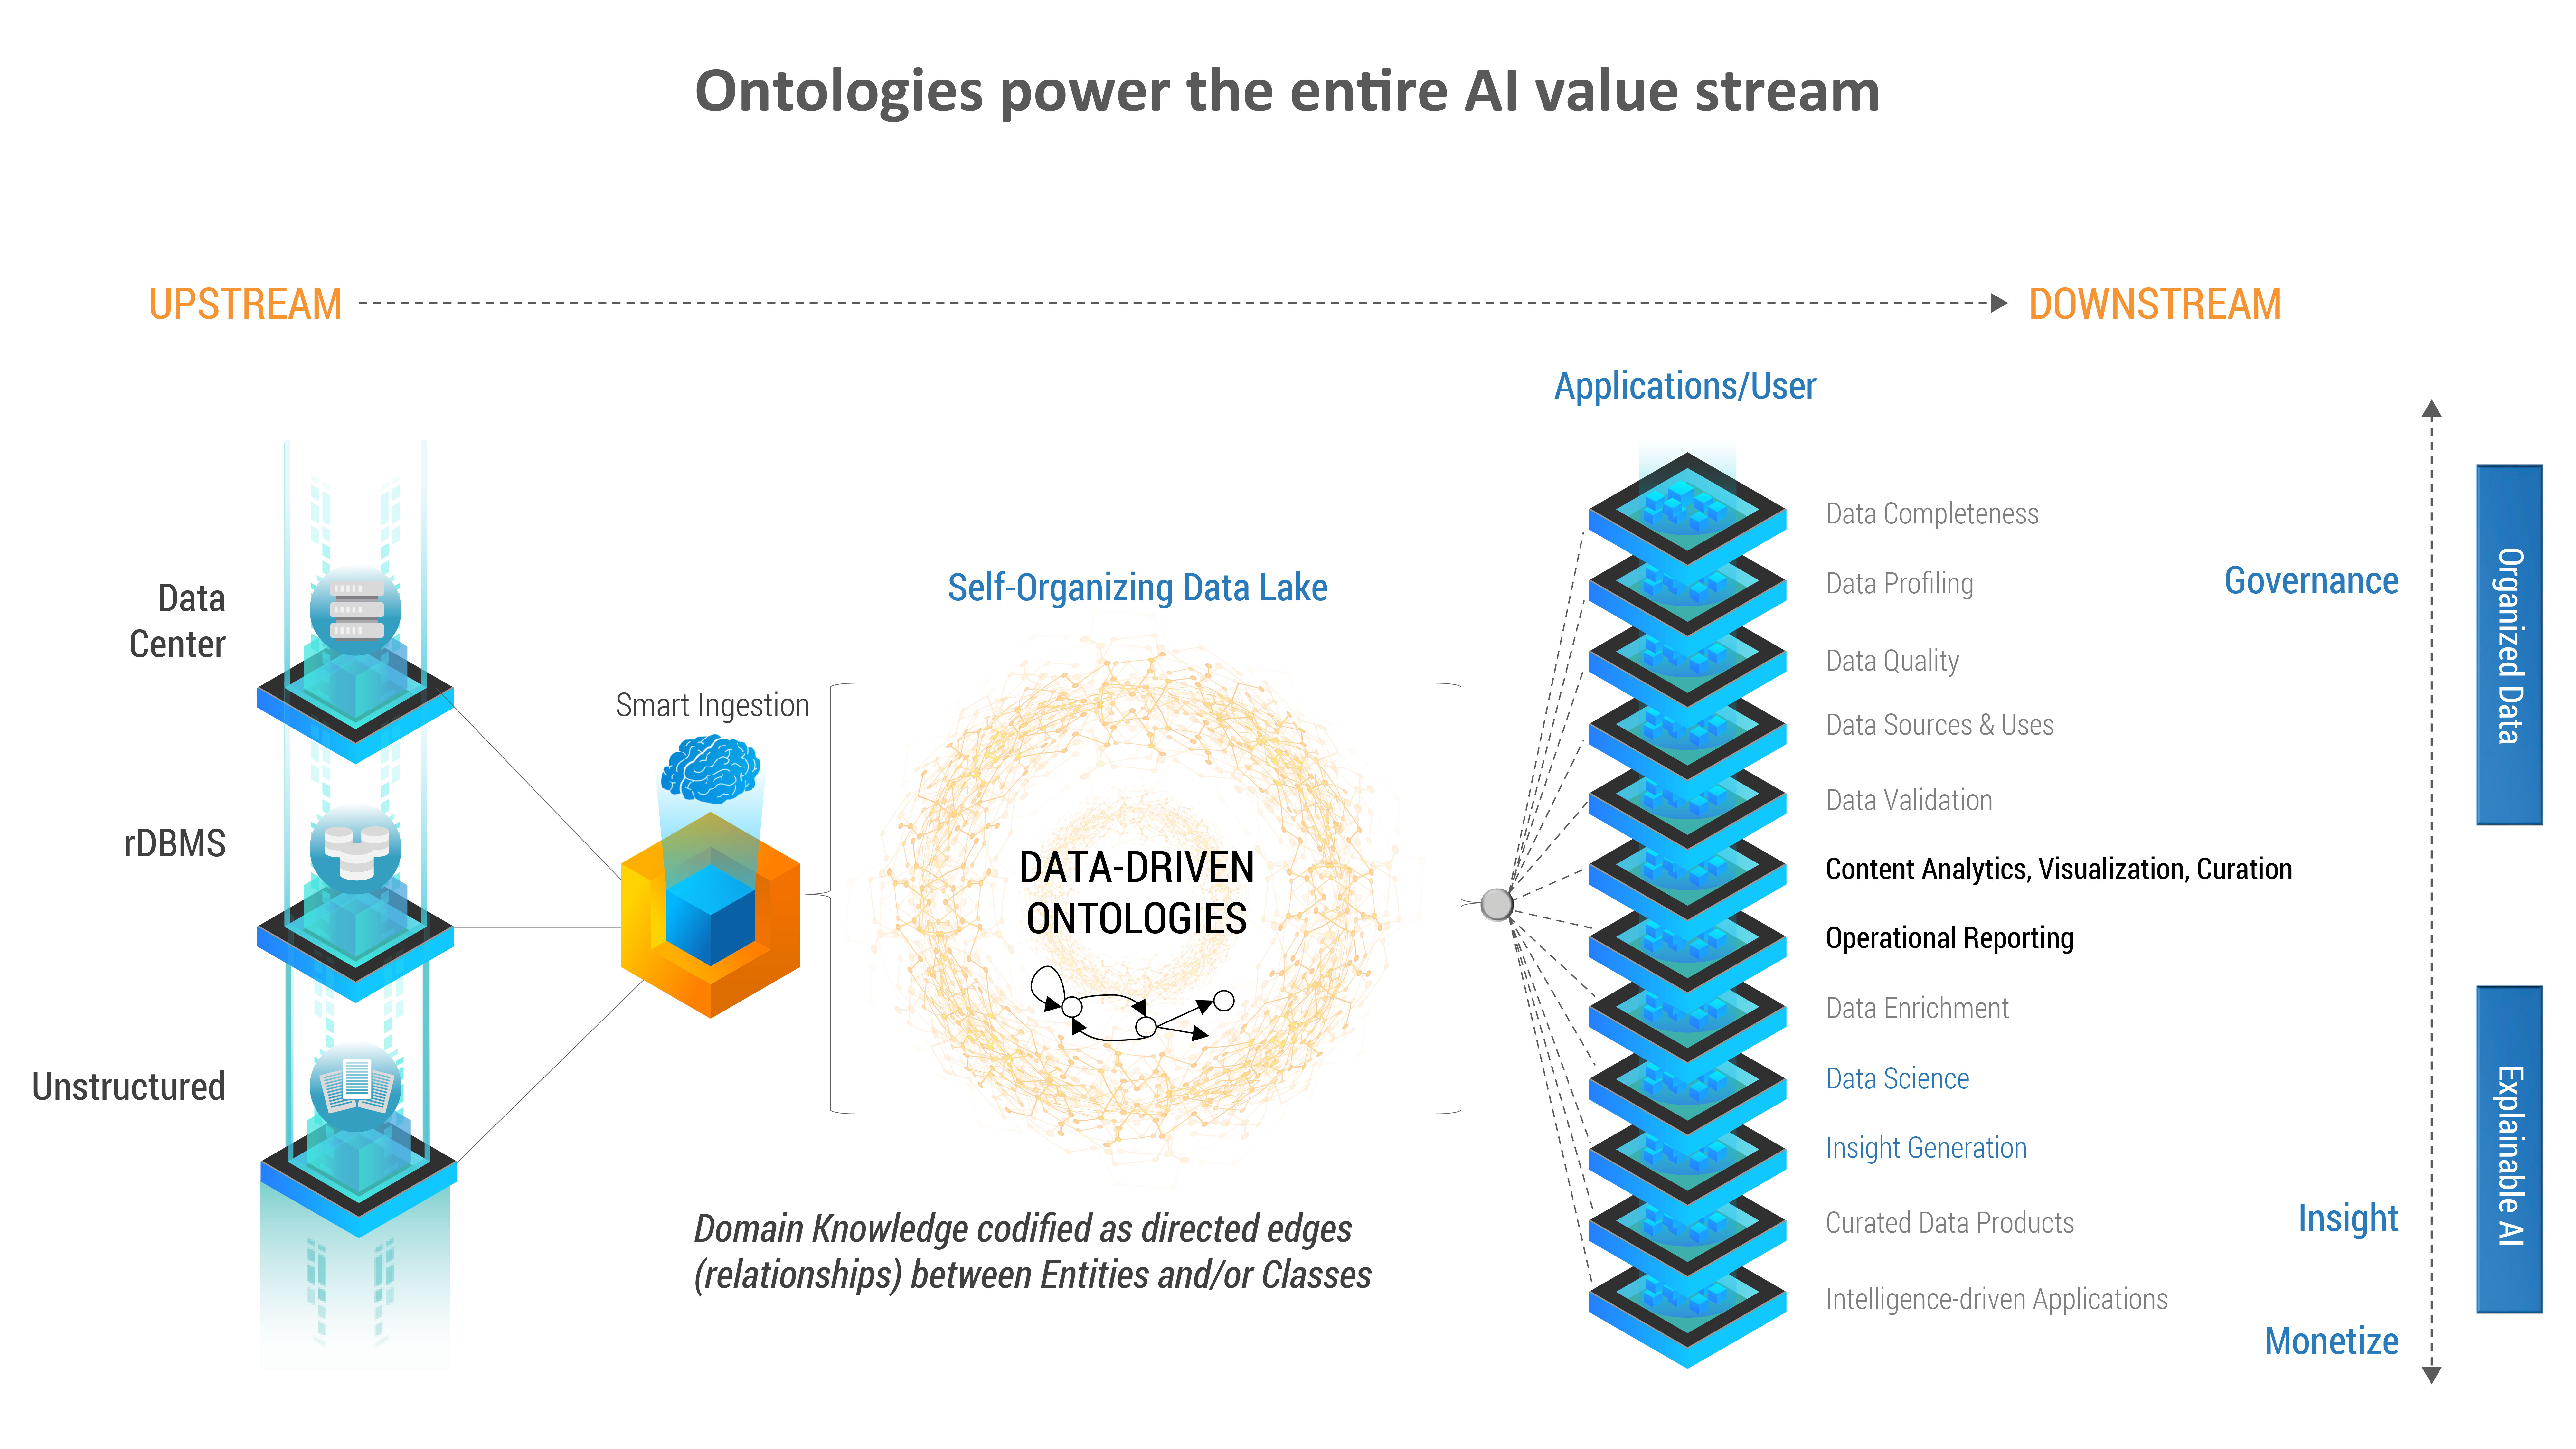 Ontologies power the entire AI value system